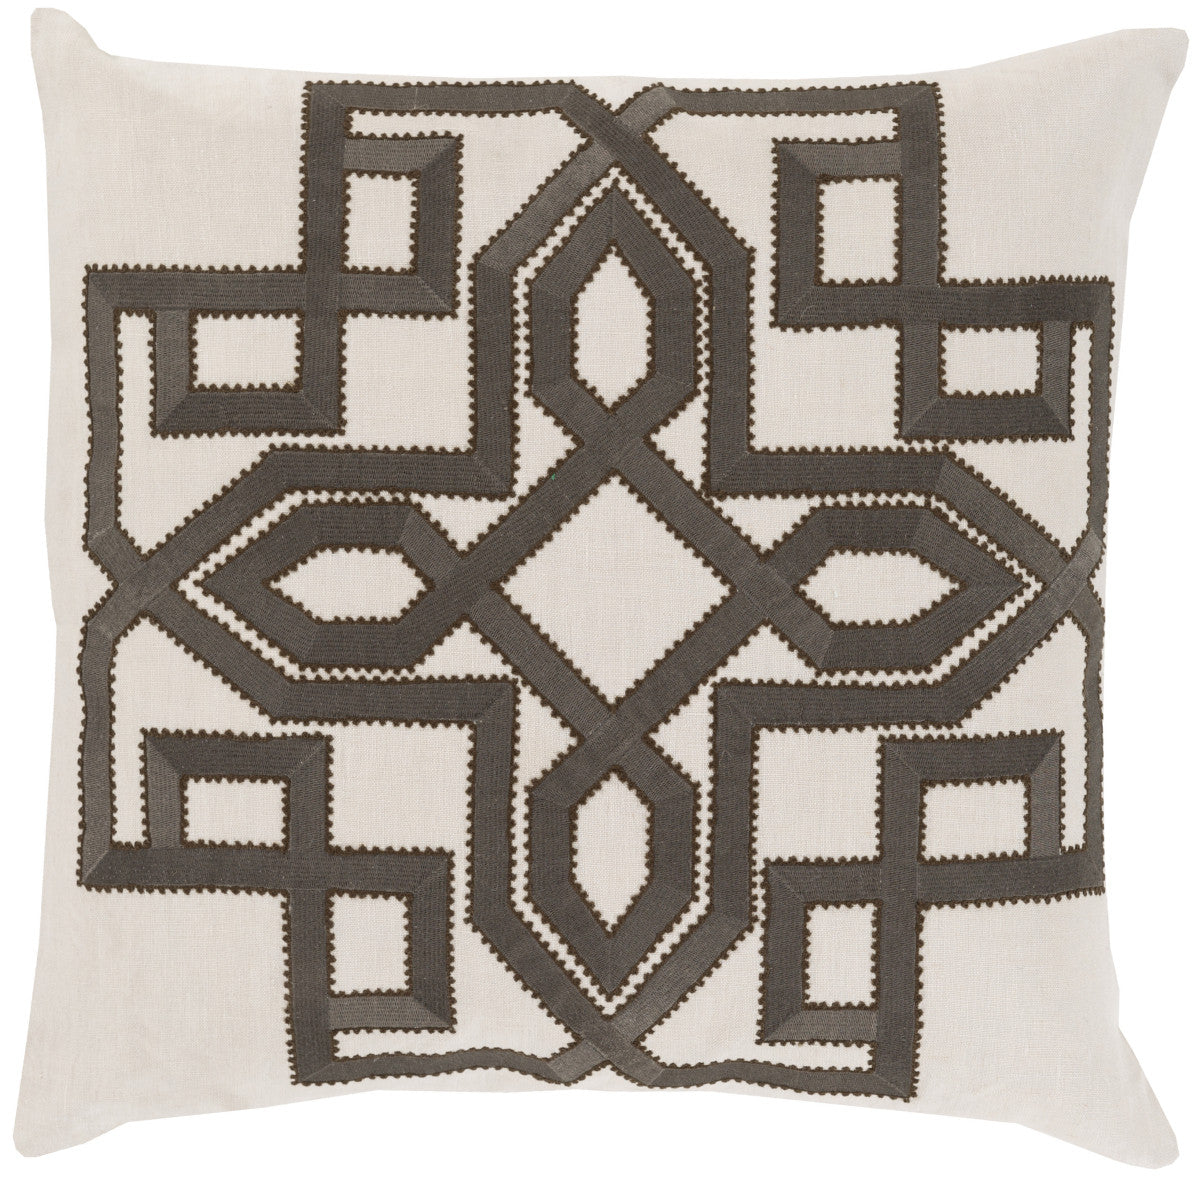 Surya Gatsby Multidimensional Chic GLD-005 Pillow by Beth Lacefield